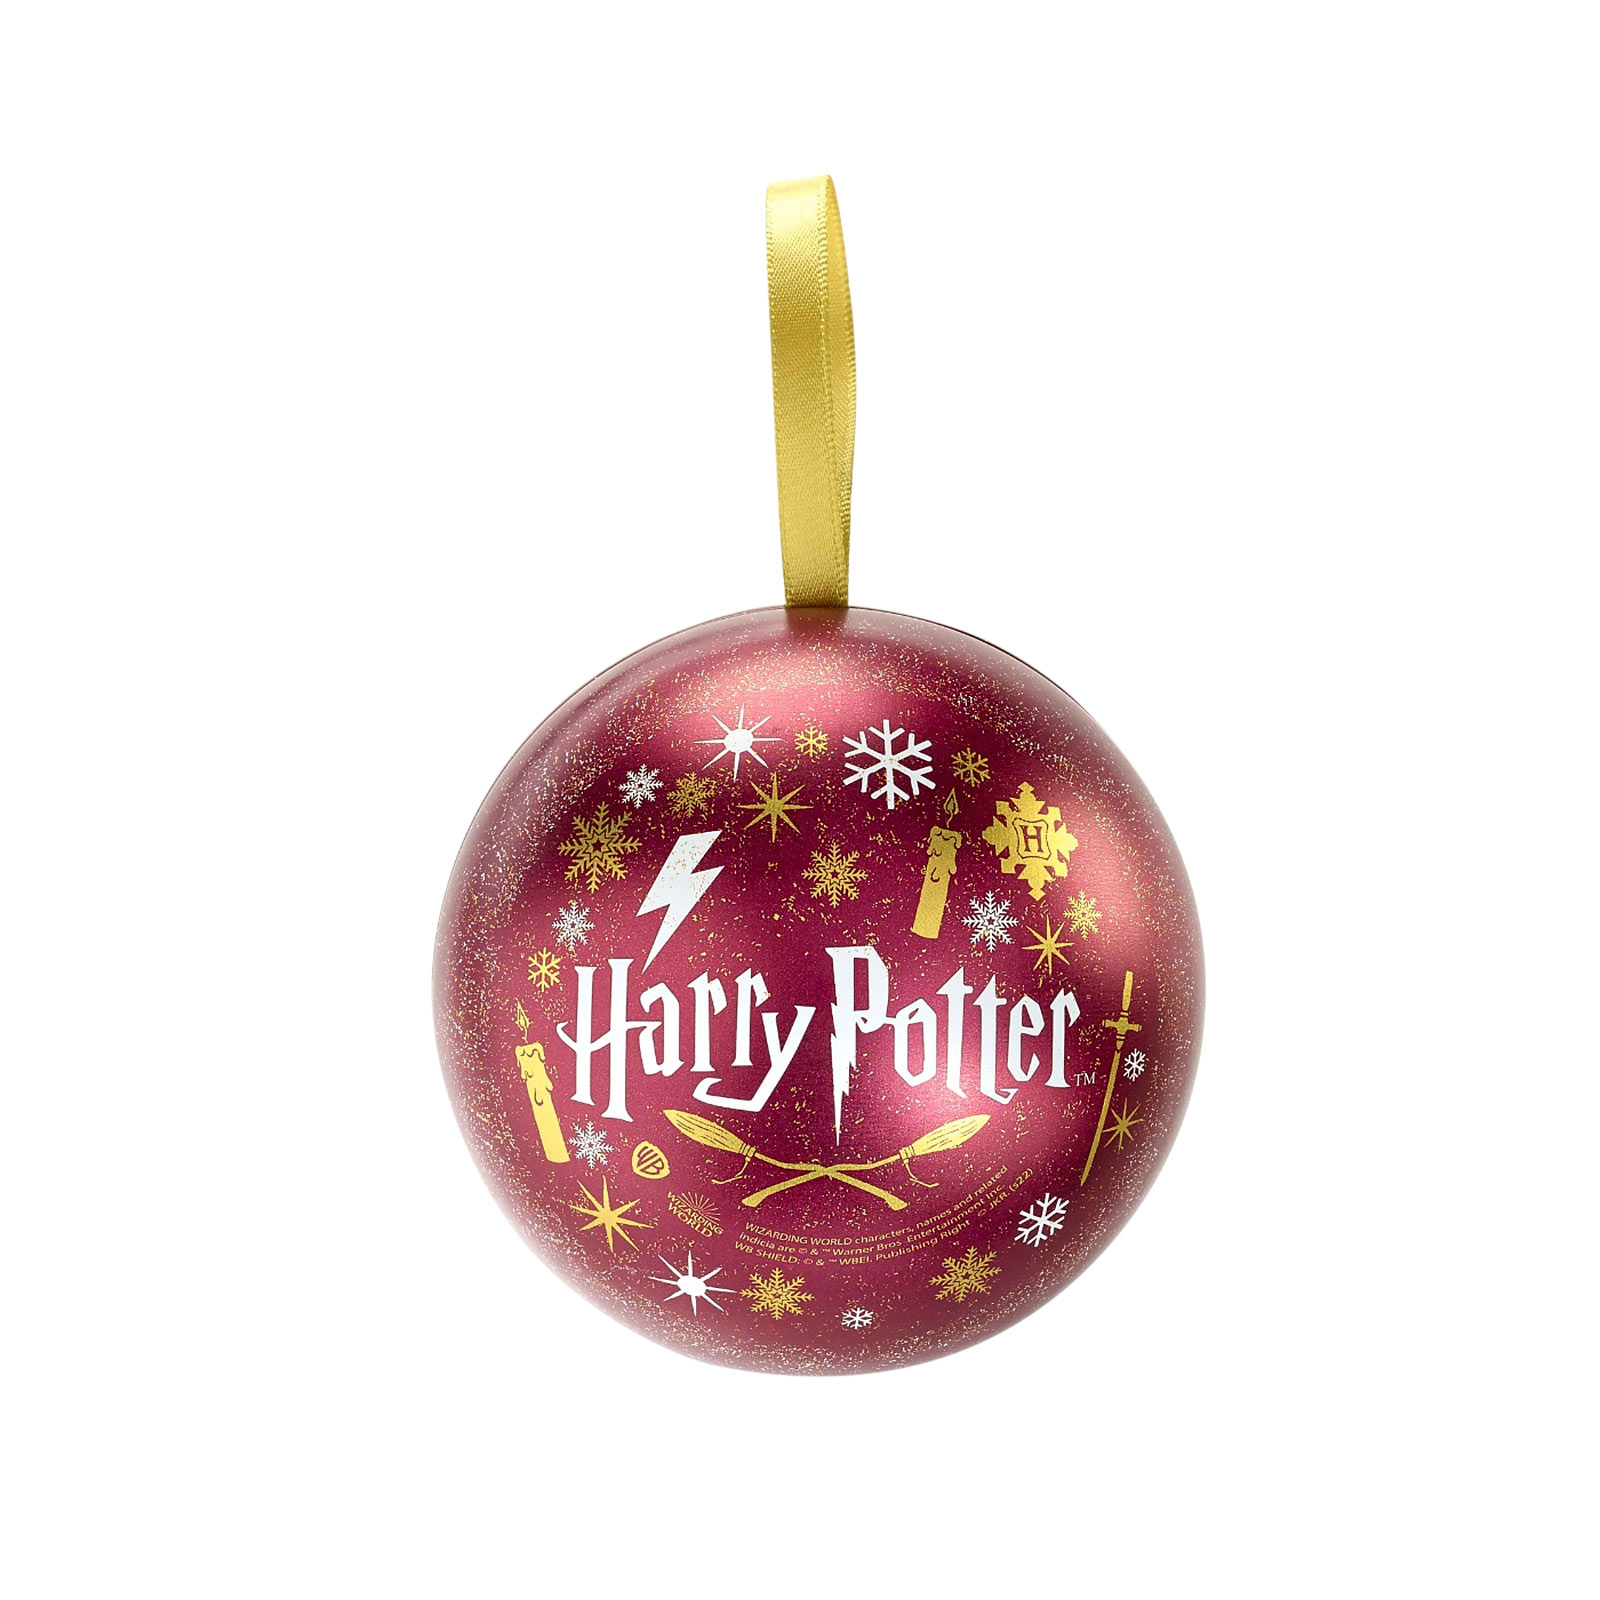 Harry Potter - Christmas ball with Fawkes necklace